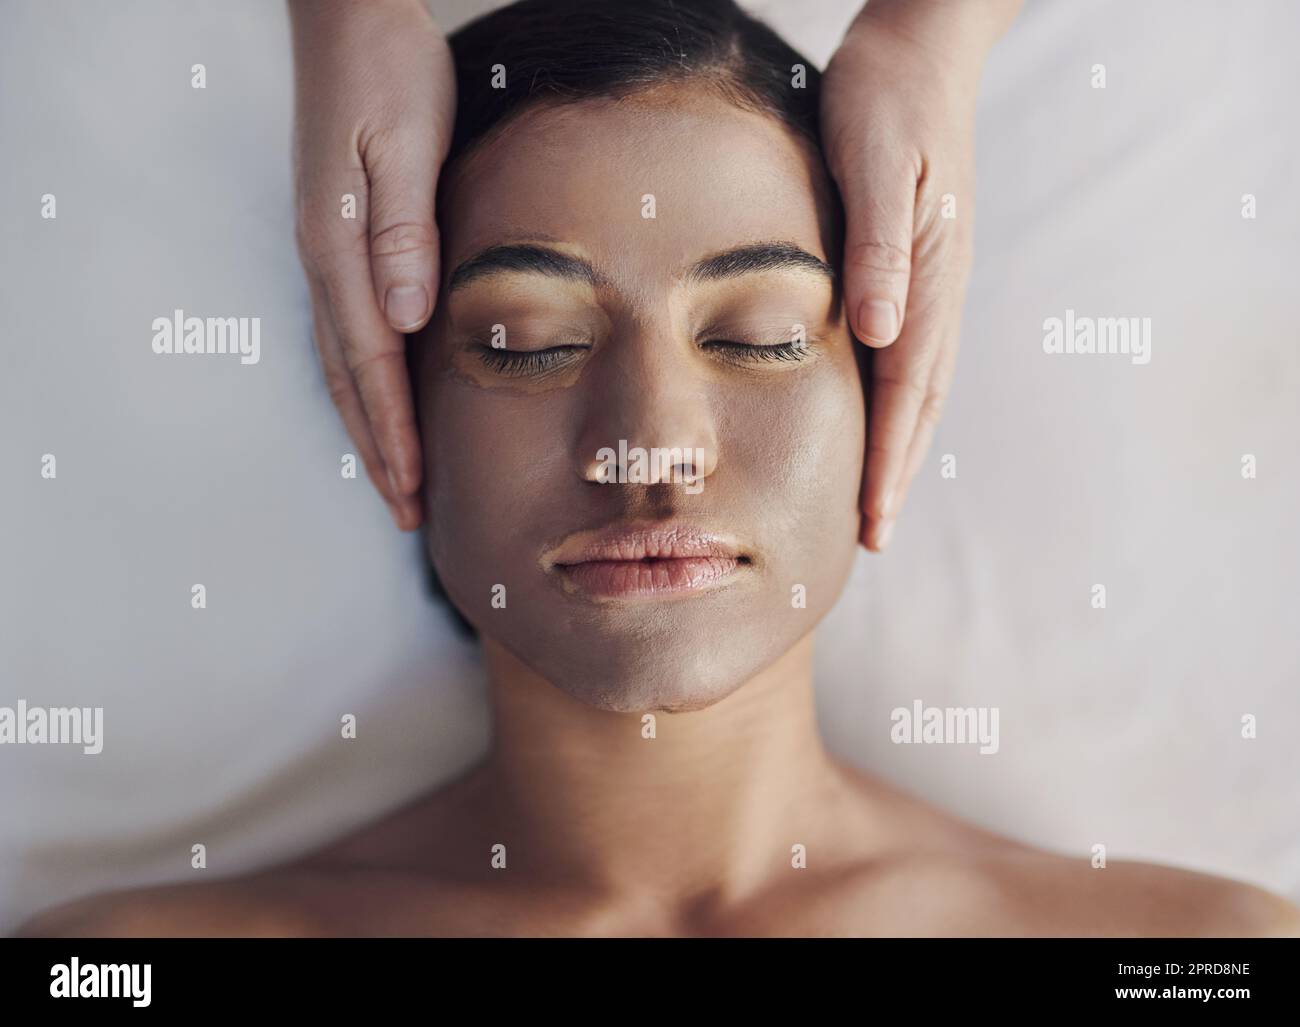 Glowing skin needs lot of nourishment. a young woman getting a facial treatment at a spa. Stock Photo